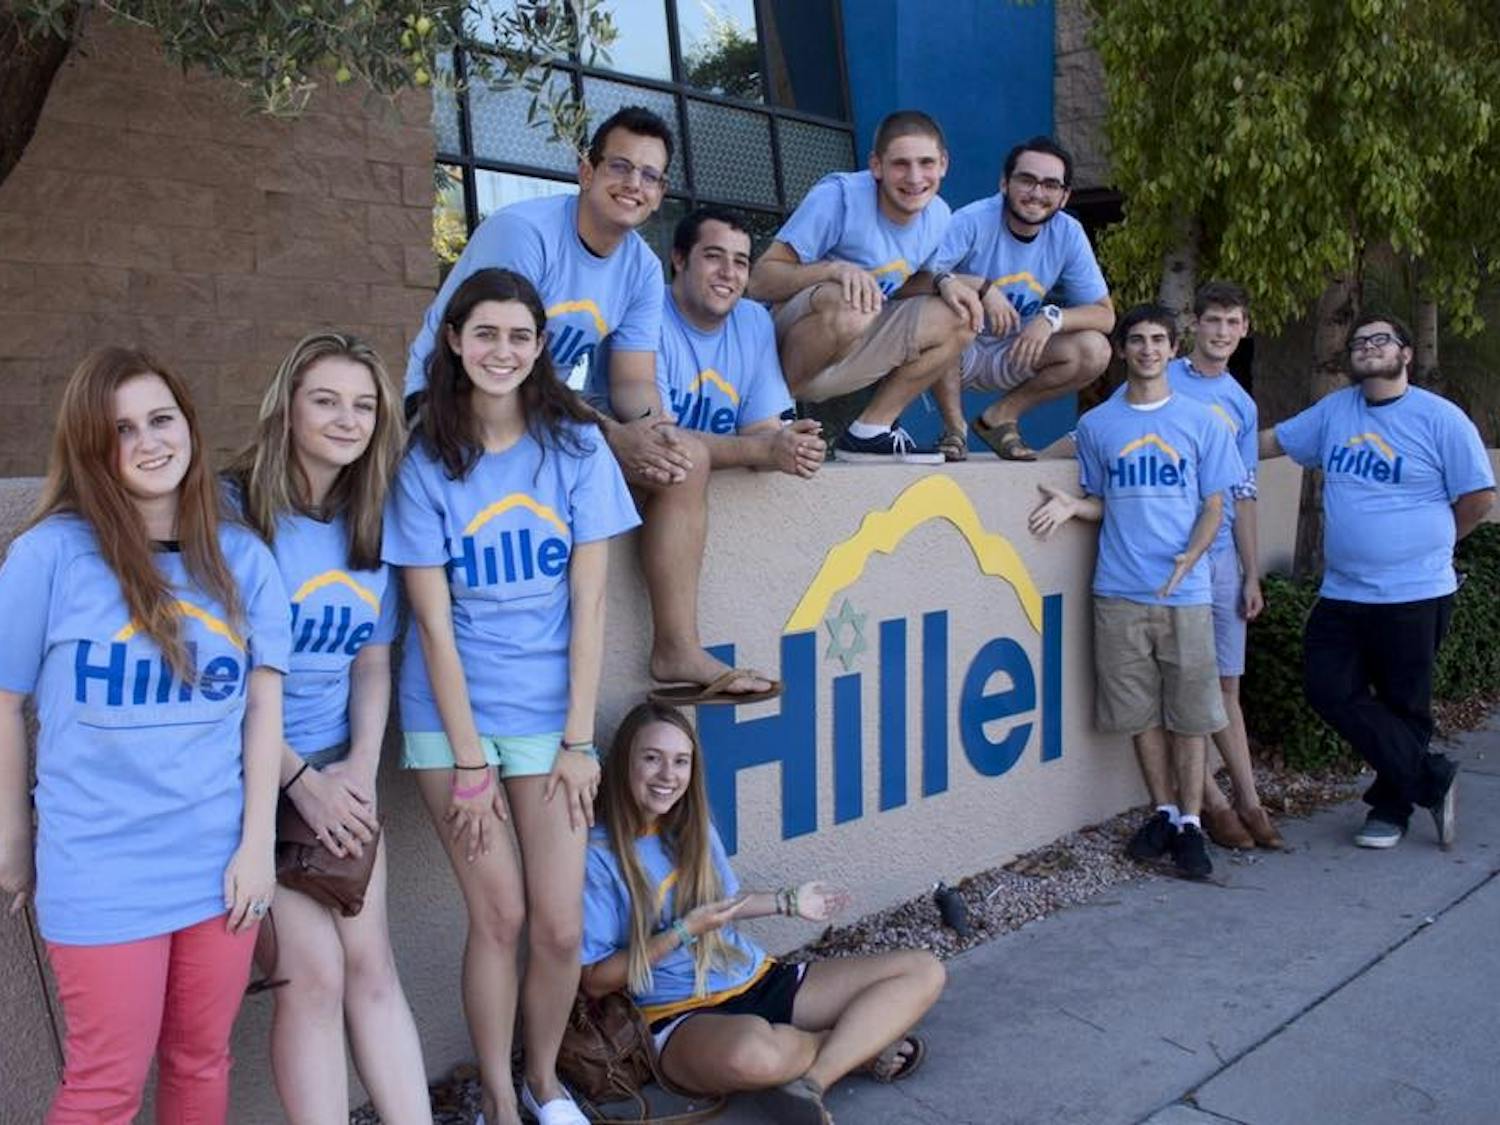 Students pose for a photo&nbsp;outside of Hillel together.